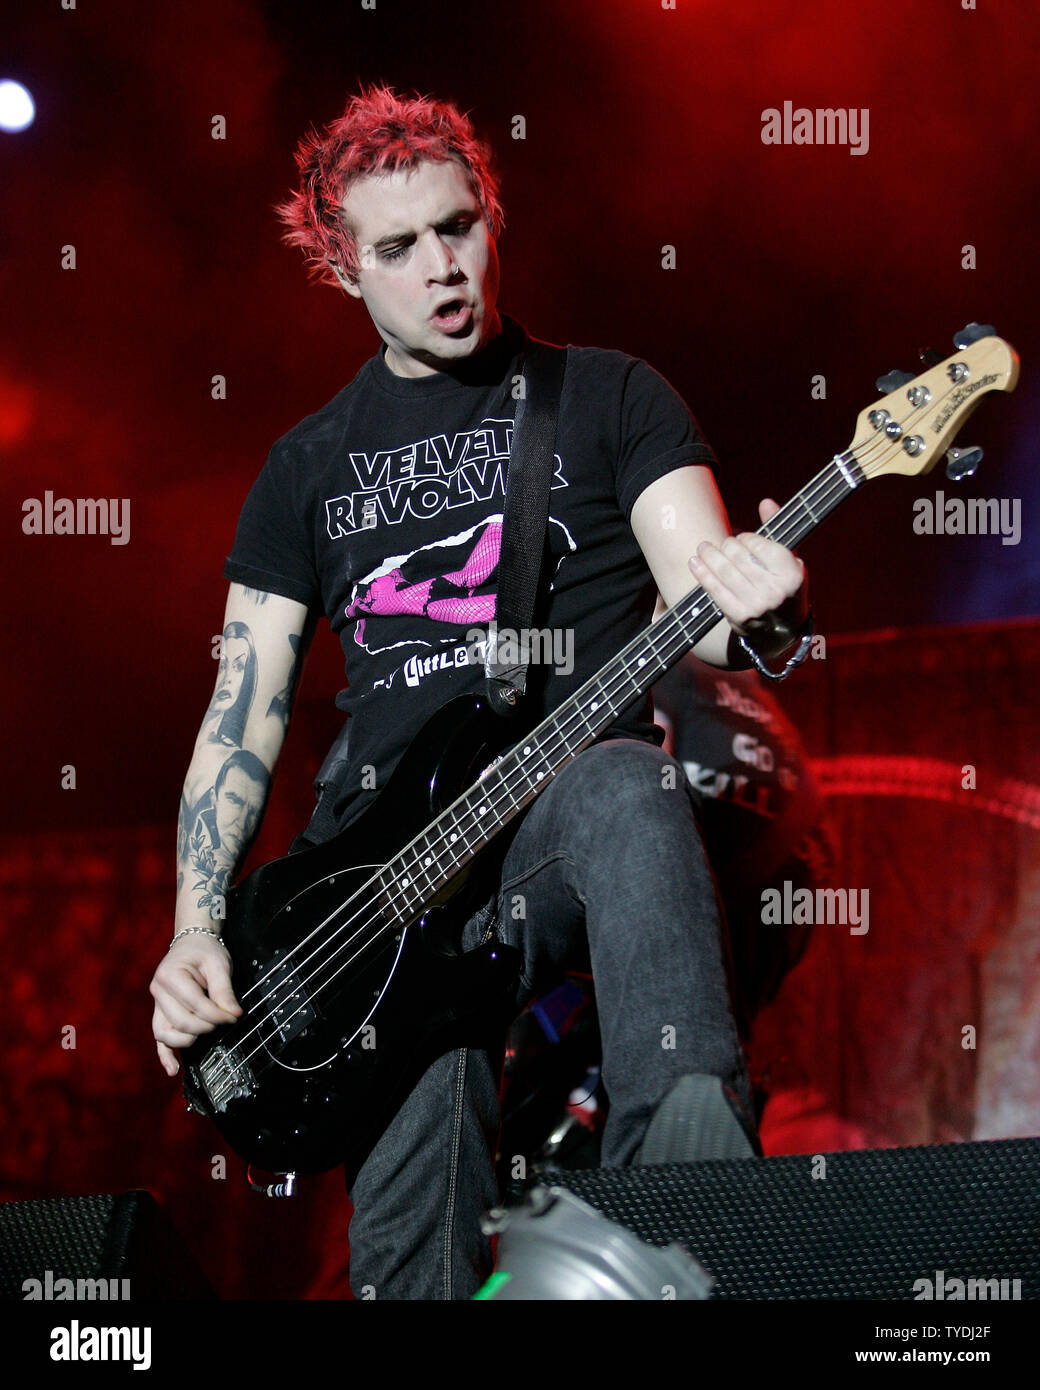 Johnny Christ with Avenged Sevenfold performs in concert at the Global Gathering 2006 Festival at the Bicentennial Park in Miami, Florida on March 18, 2006. (UPI Photo/Michael Bush) Stock Photo